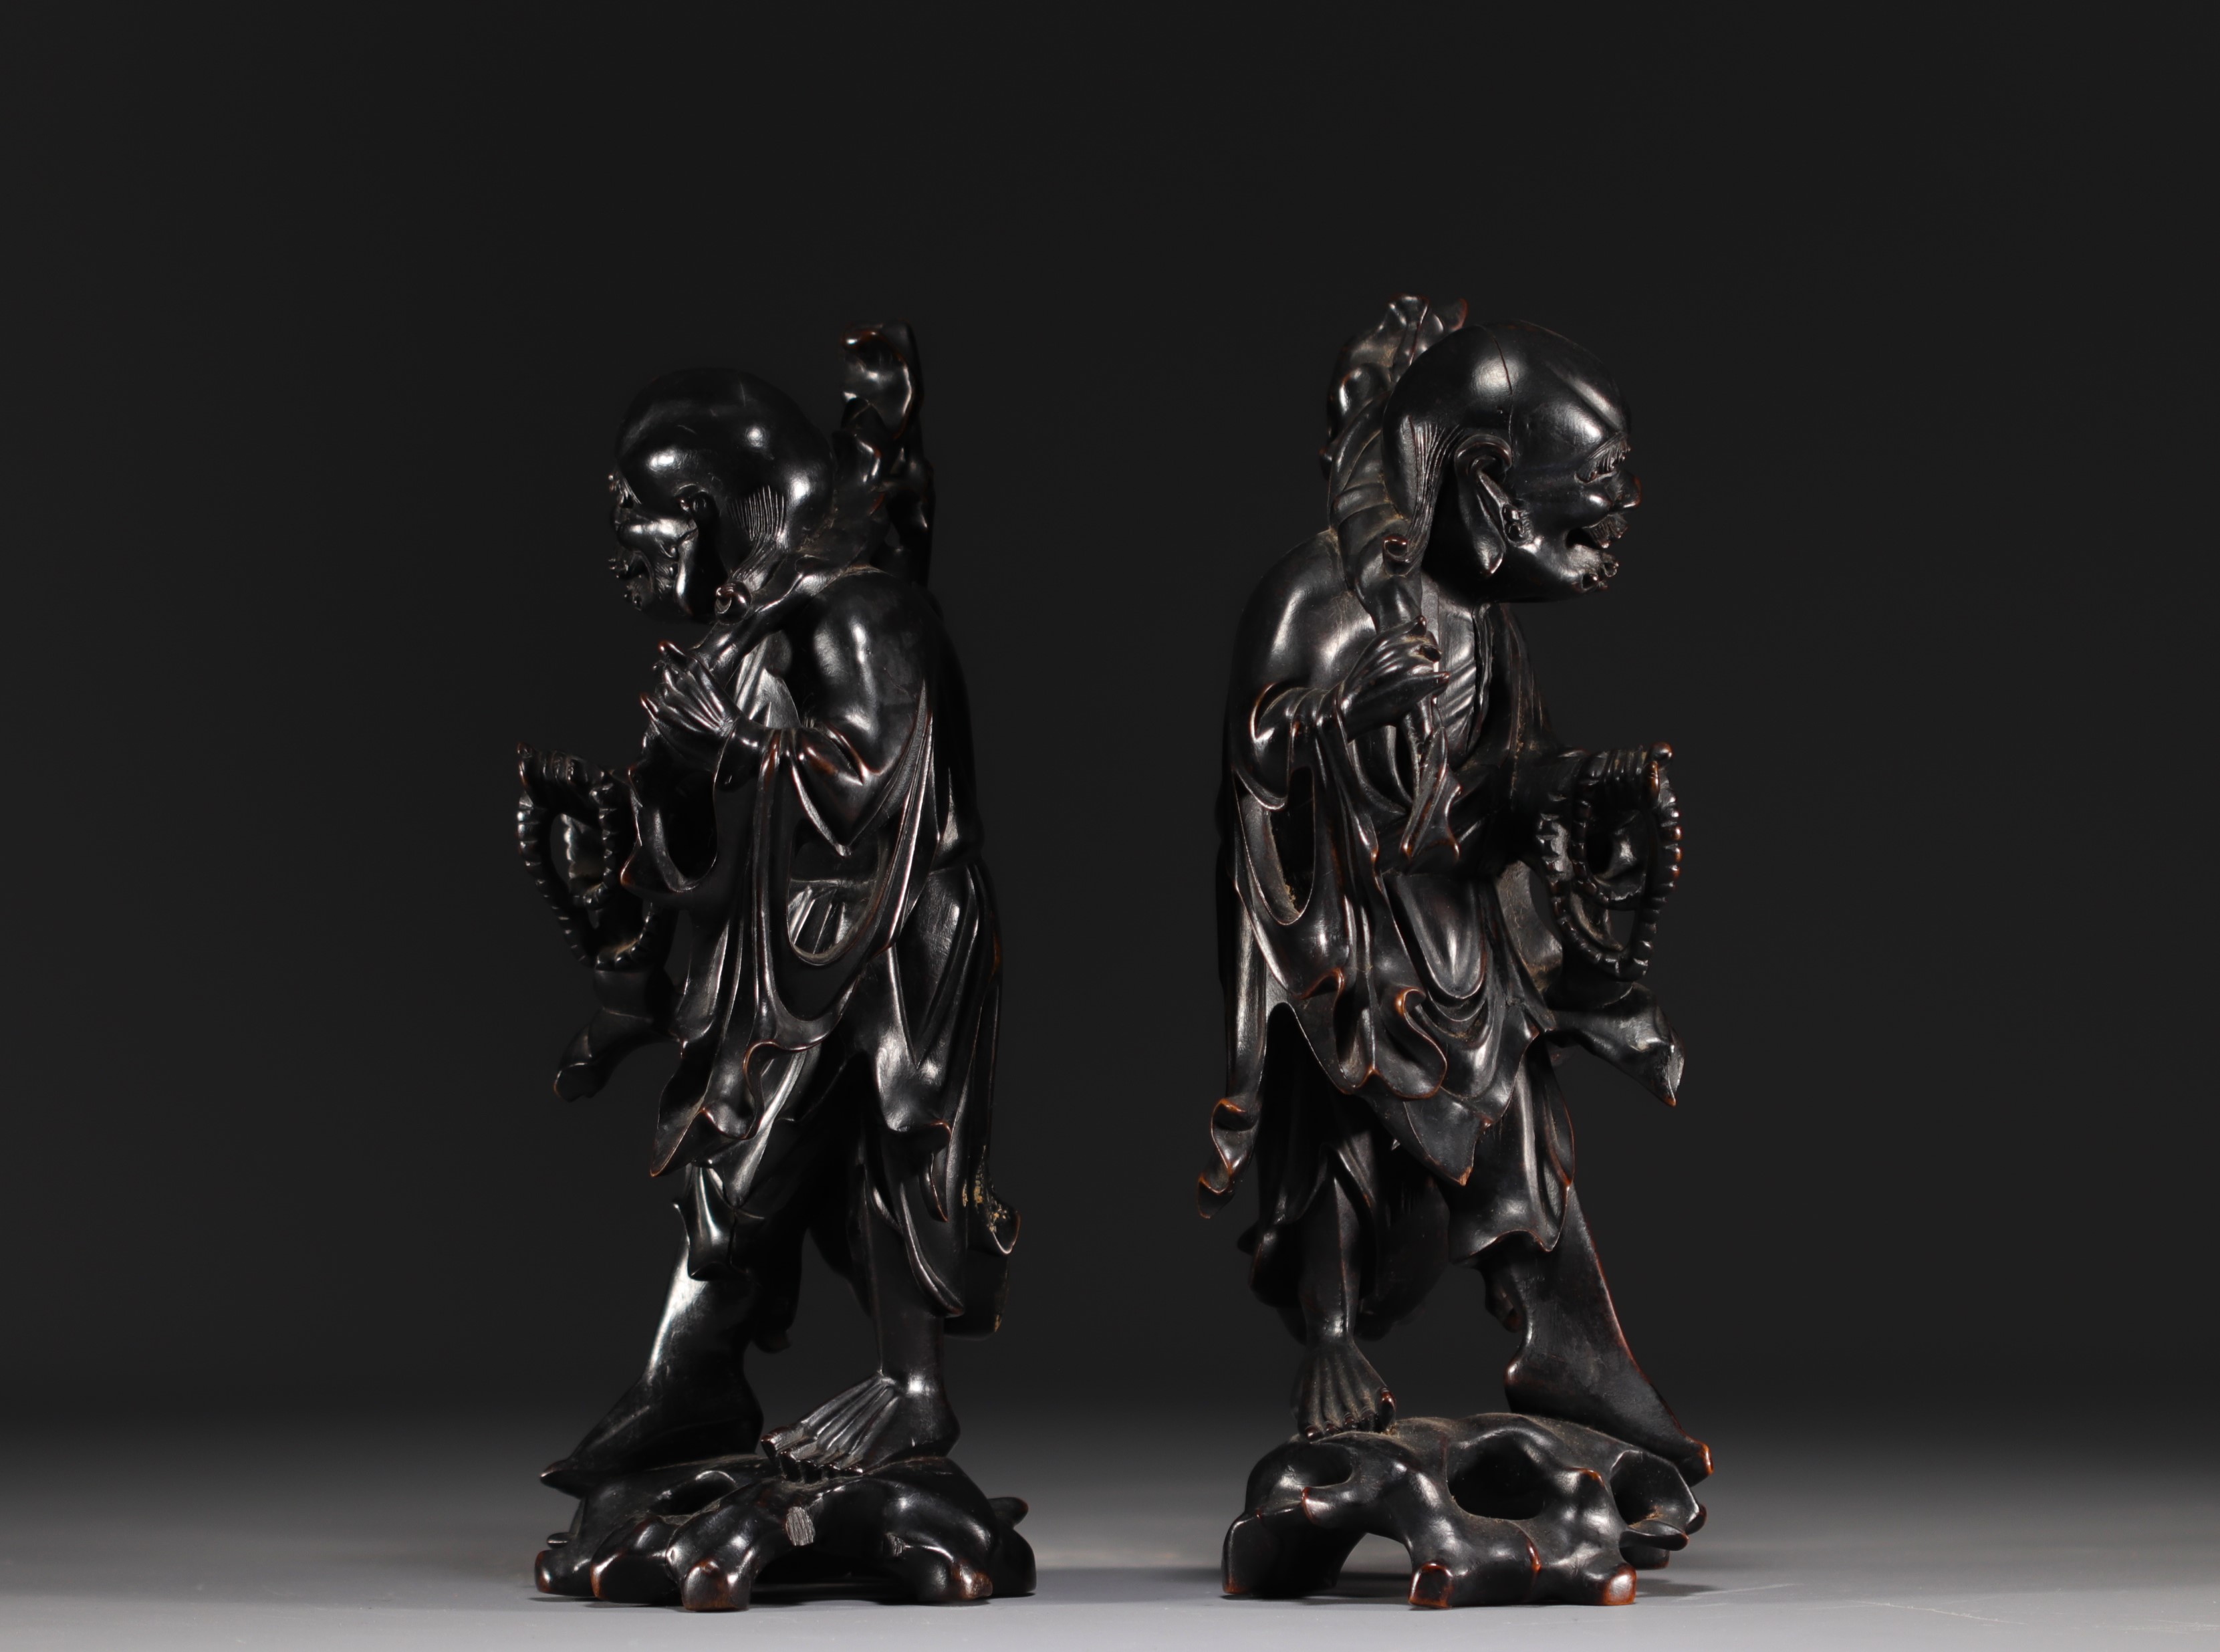 China, Vietnam - Pair of exotic wood carvings representing two figures. - Image 4 of 4